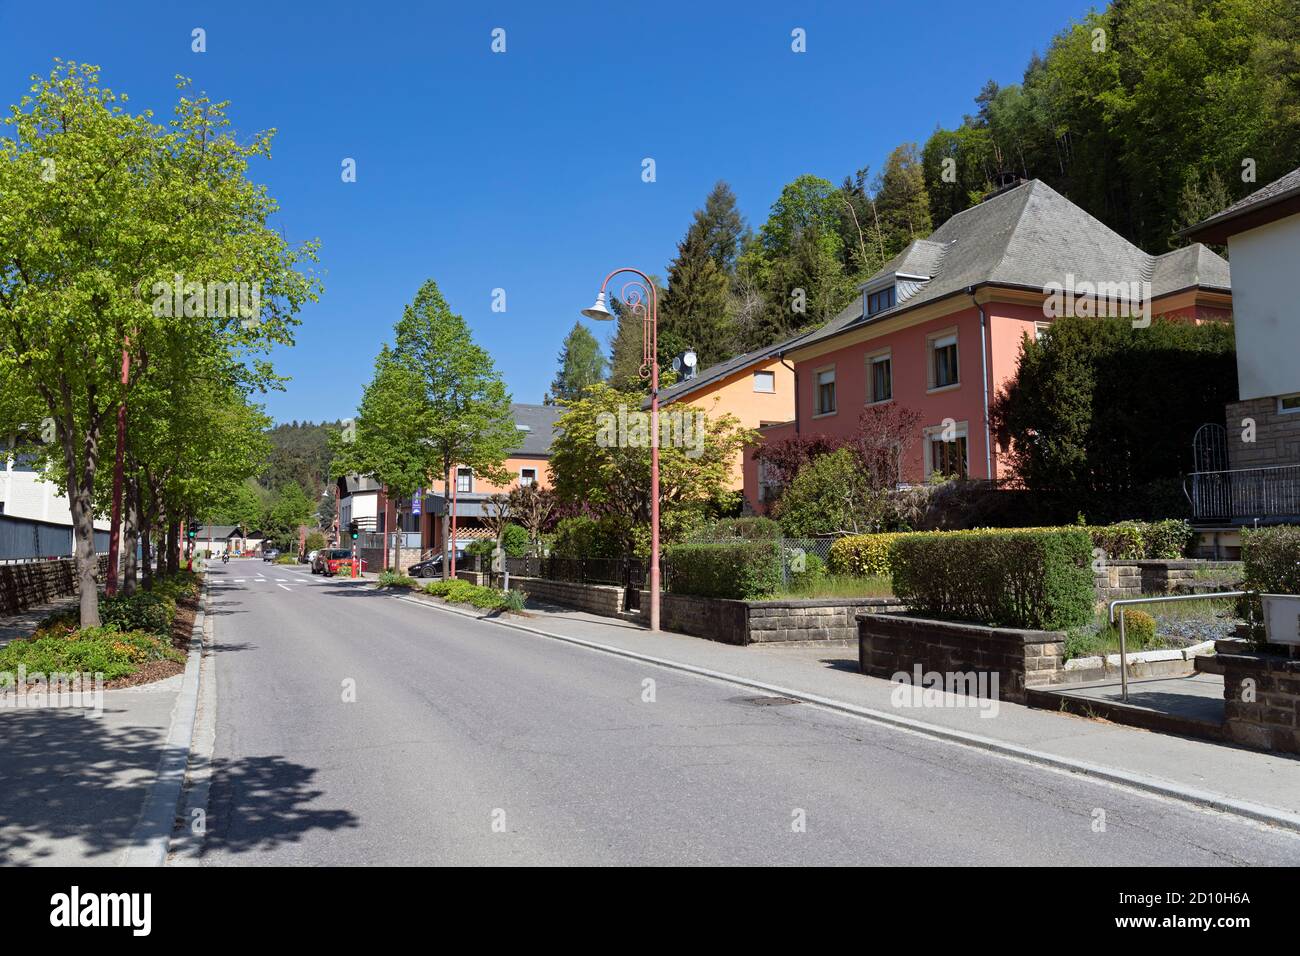 Europe, Luxembourg, Larochette, Traditional Houses on Rue de Osterbour Stock Photo